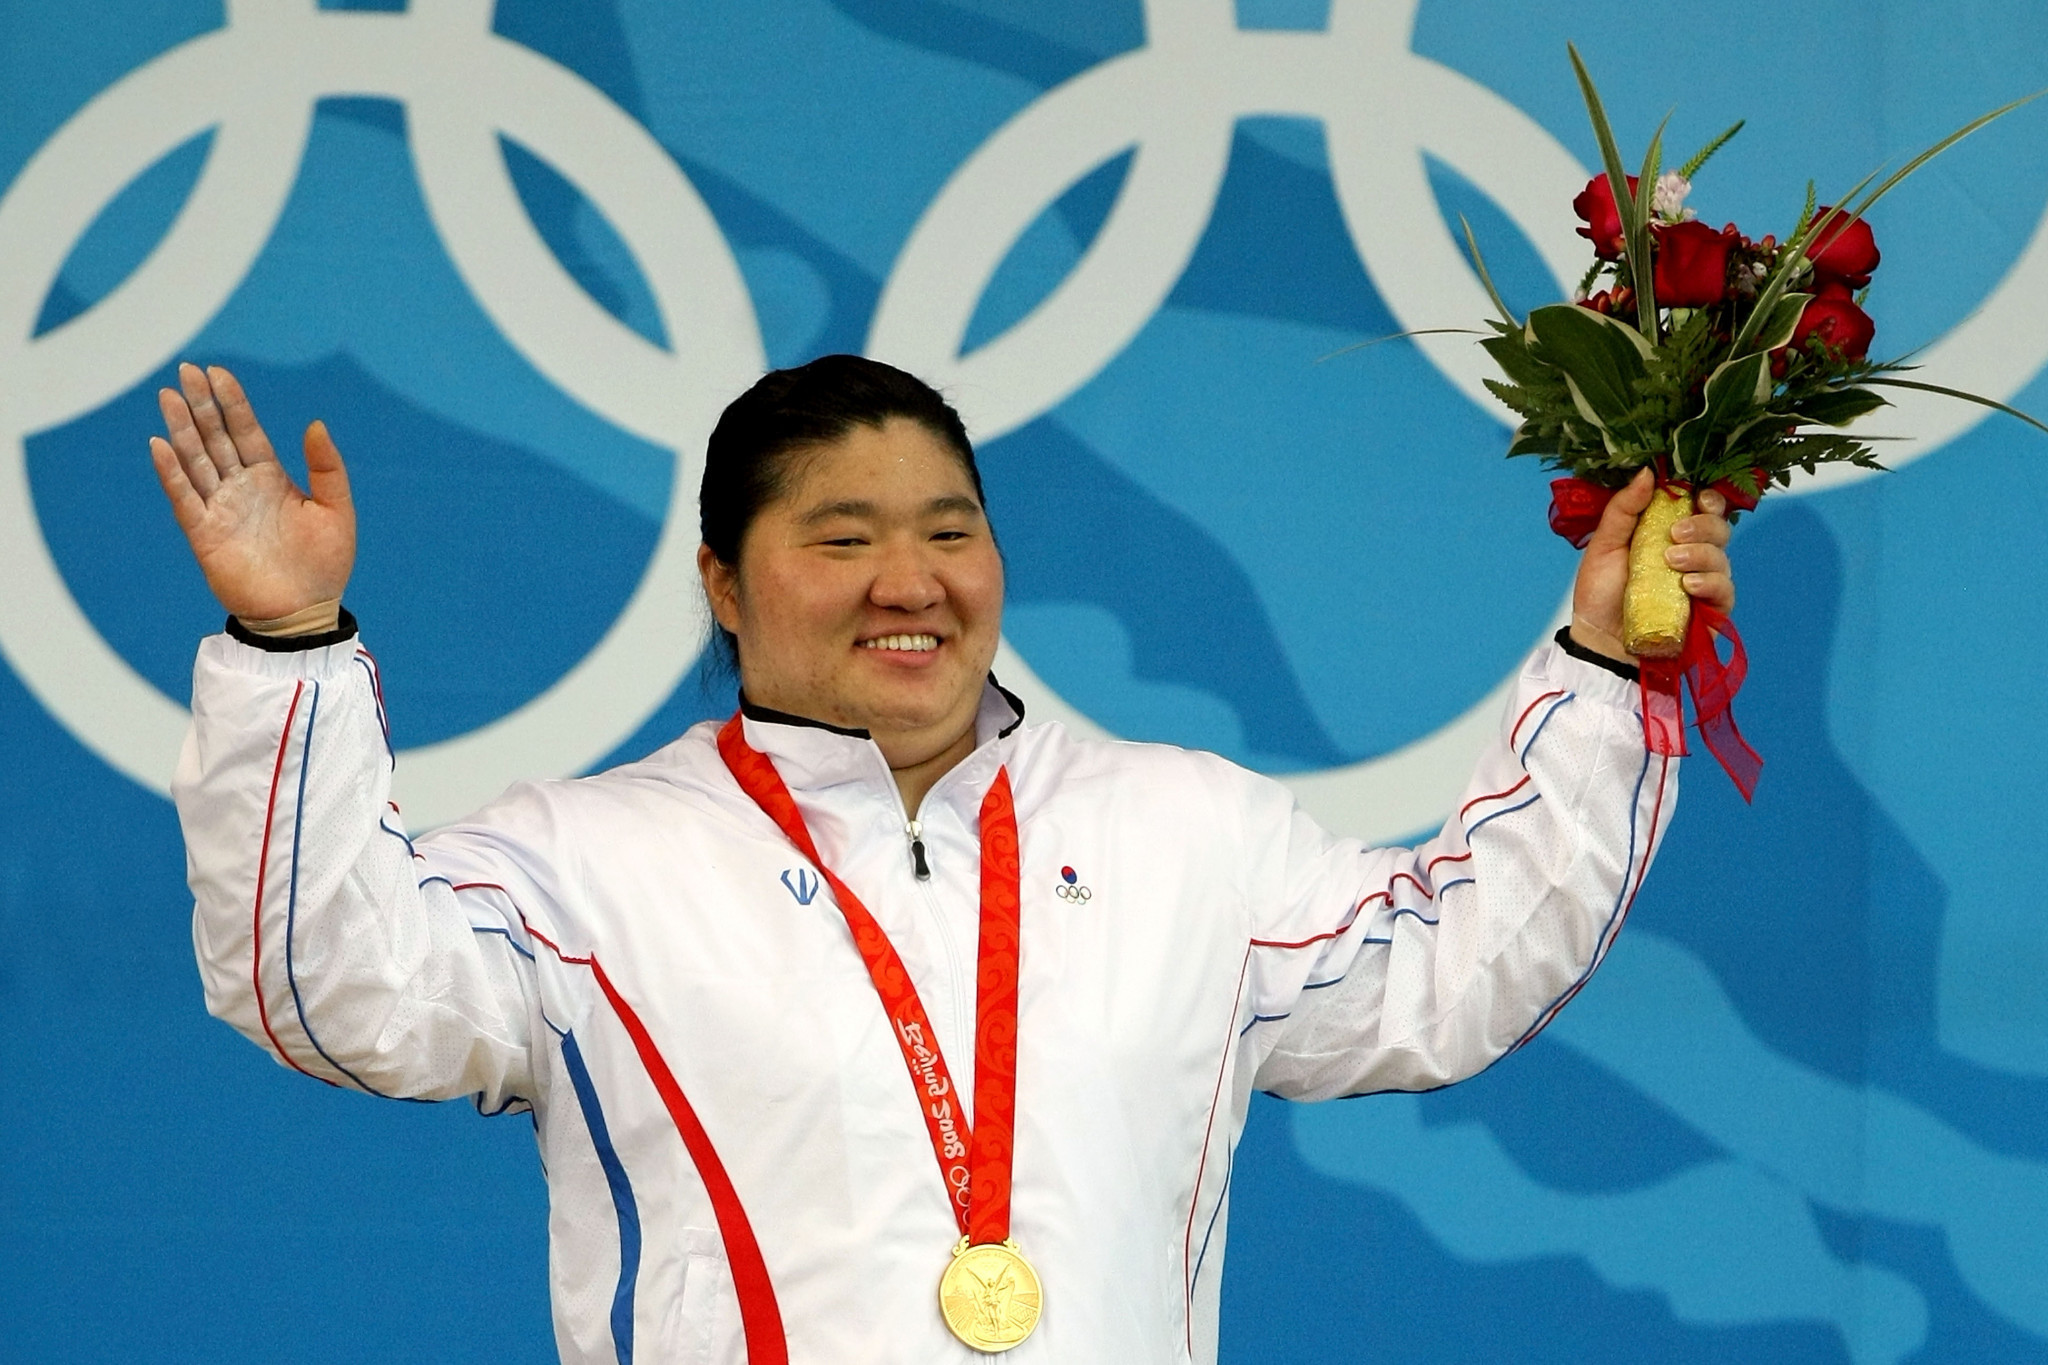 Jang Mi-ran joins Olympic shooter Park Jong-gil and swimmer Choi Yun-hui as the other elite athletes to hold the post in South Korea ©Getty Images